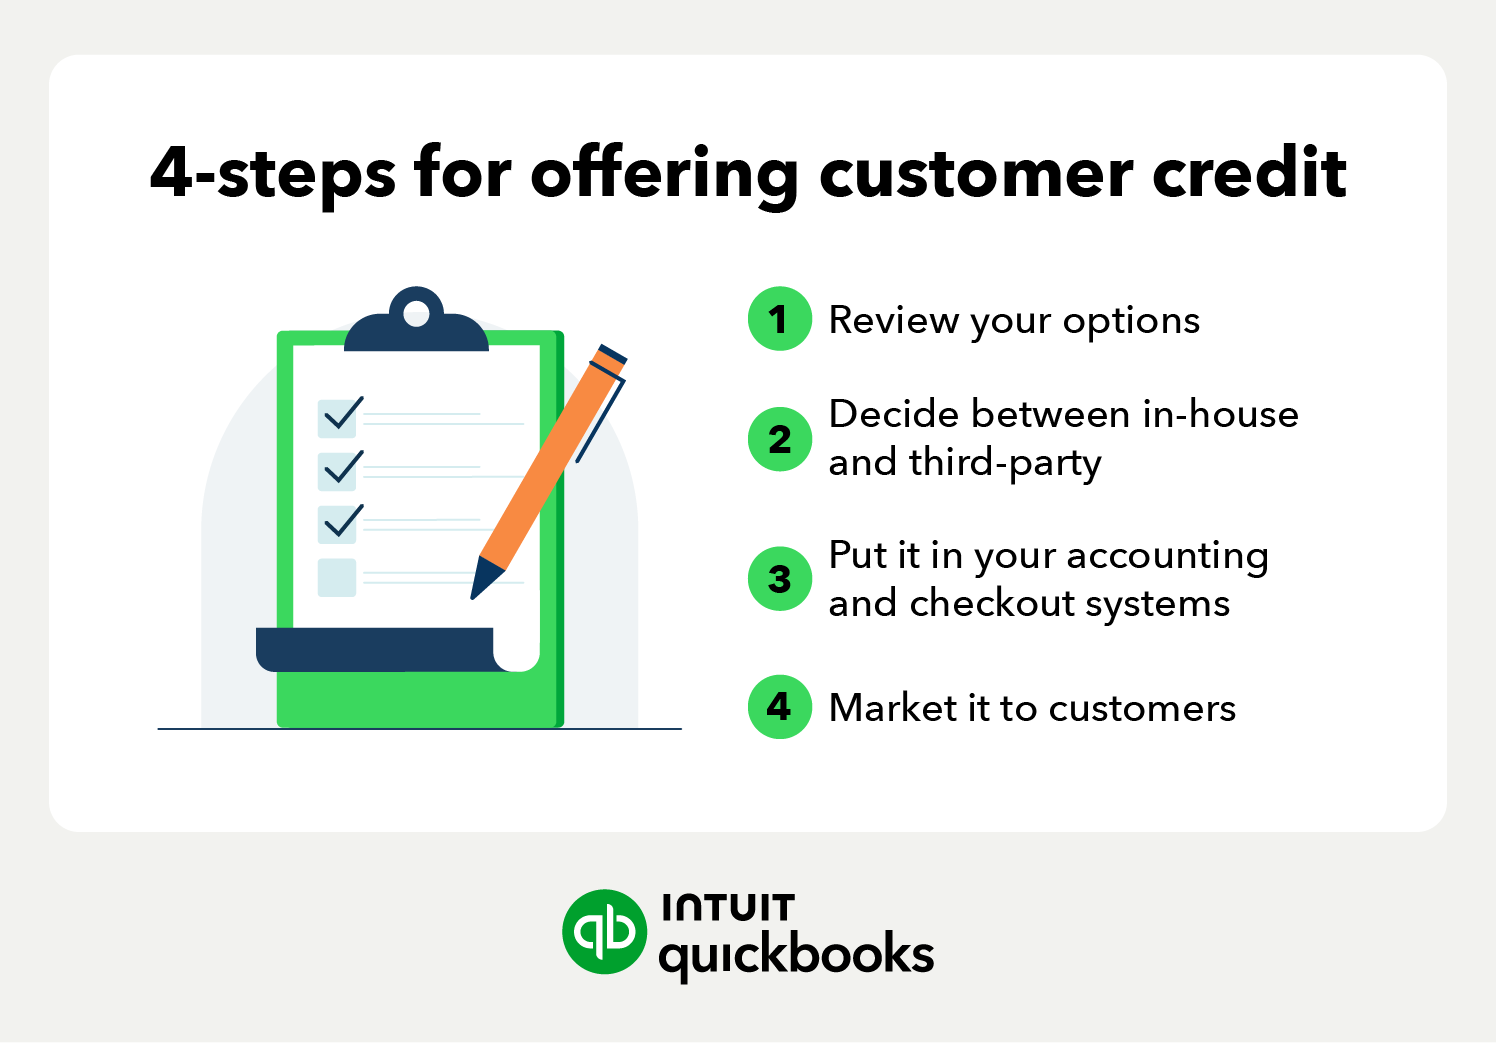 An illustration of the four steps for offering customer credit: review your options, decide between in-house and third-party, put it in your accounting system, and market it to customers.